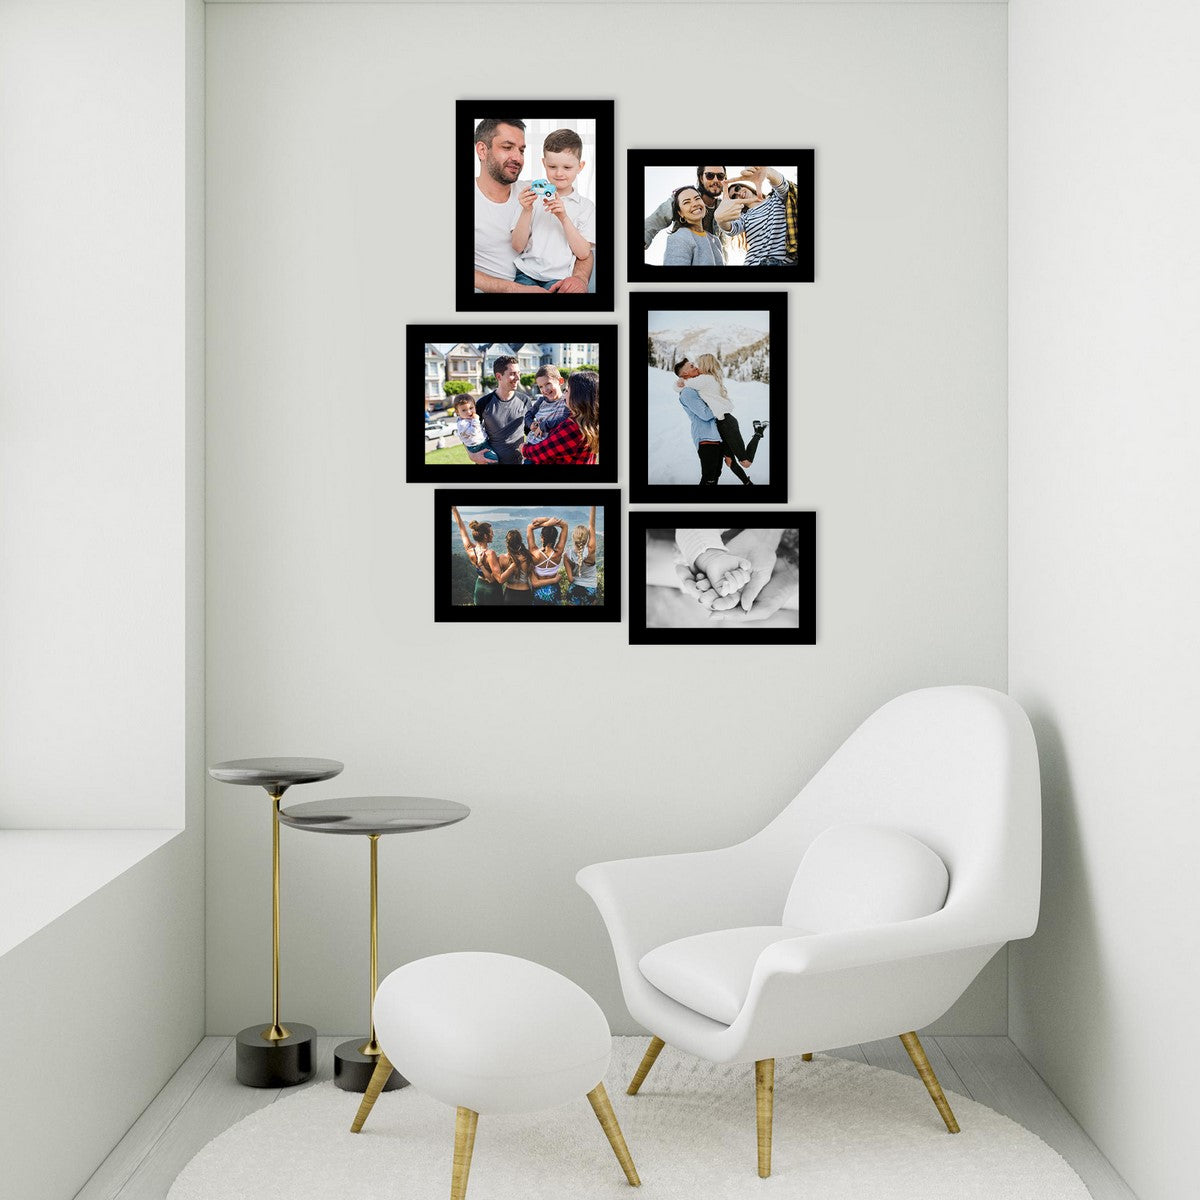 Memory Wall Collage Photo Frame - Set of 6 Photo Frames for 3 Photos of 5"x7", 3 Photos of 6"x8" 2